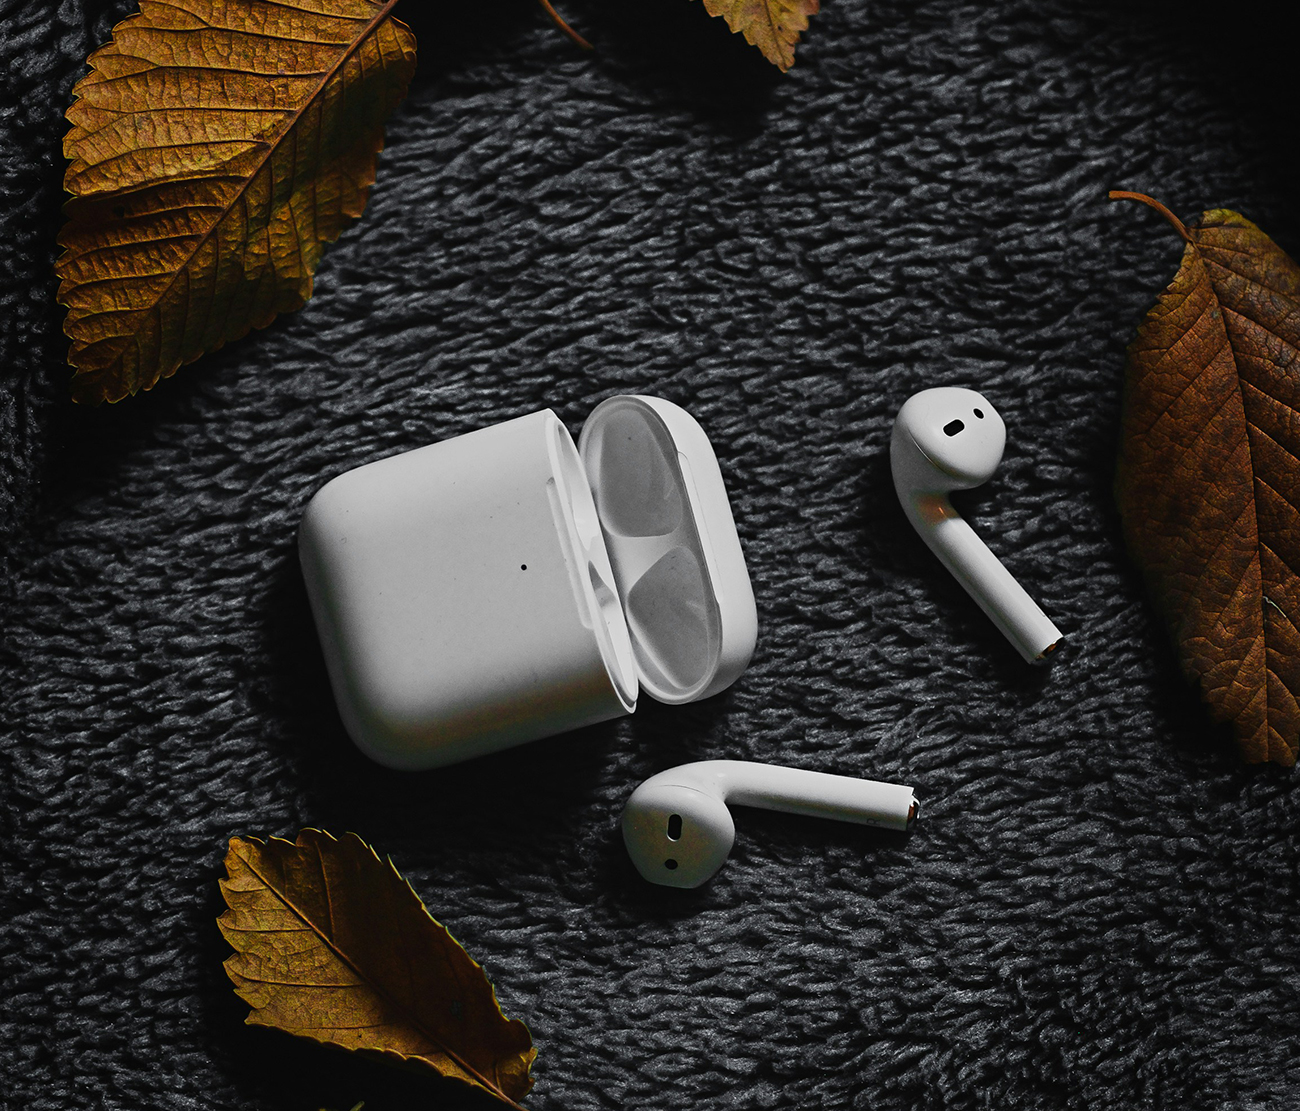 AirPods are one of the best Bluetooth earphones